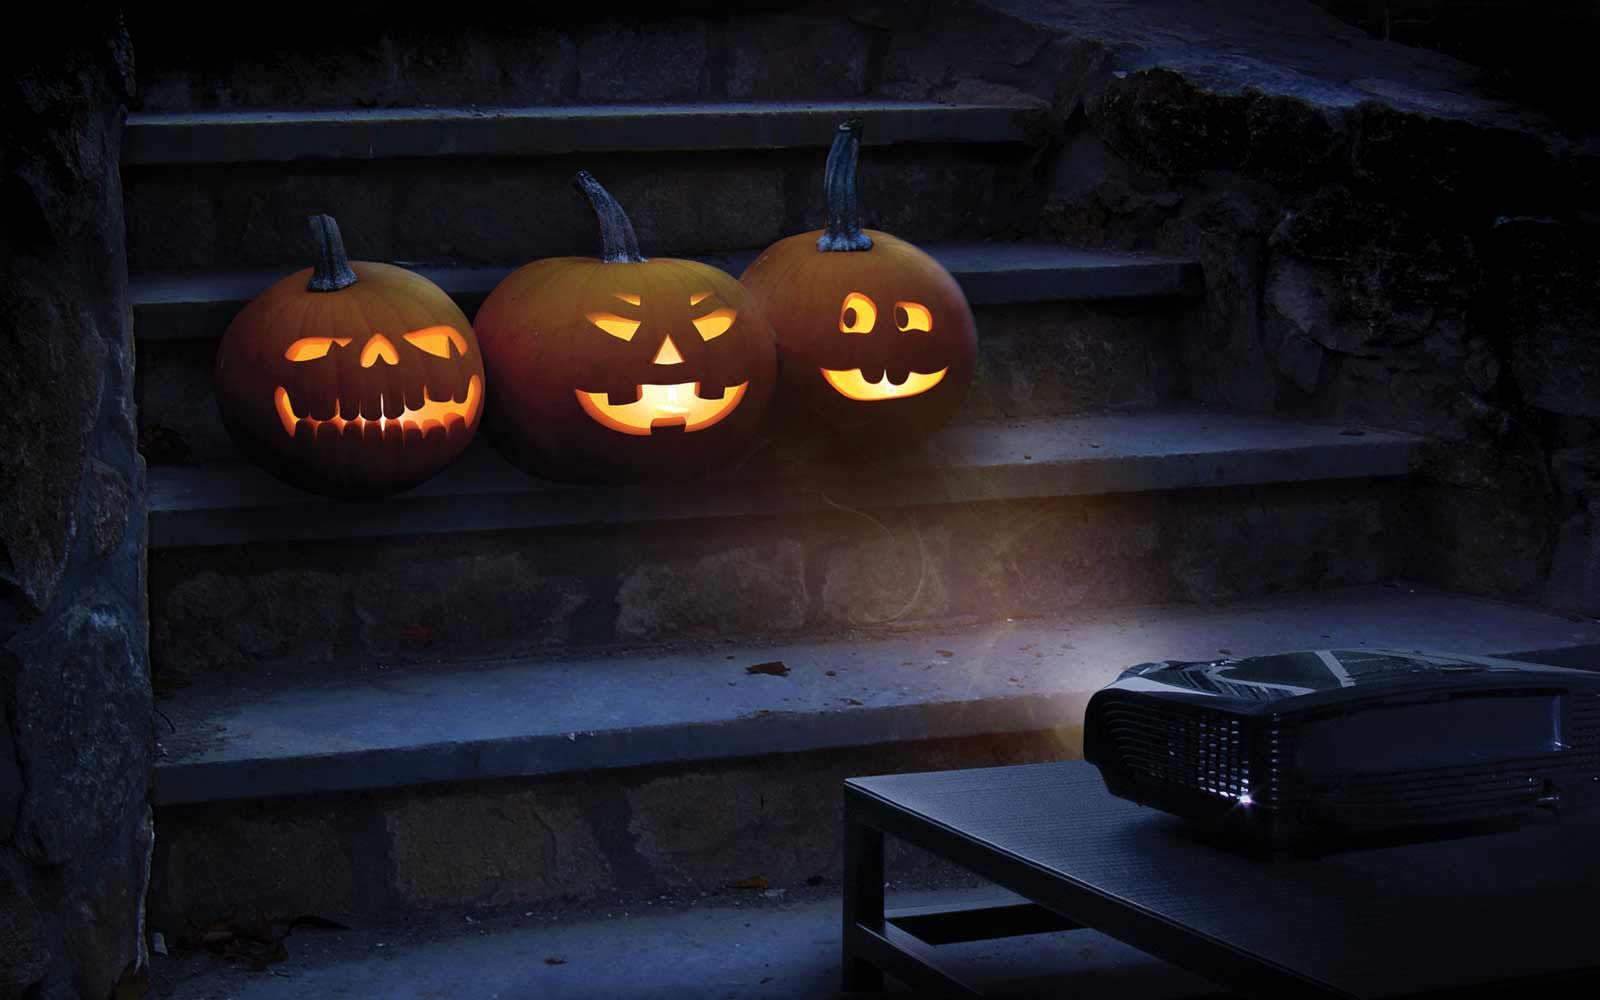 Jack-o-lantern Halloween projections download from AtmosFEARfx